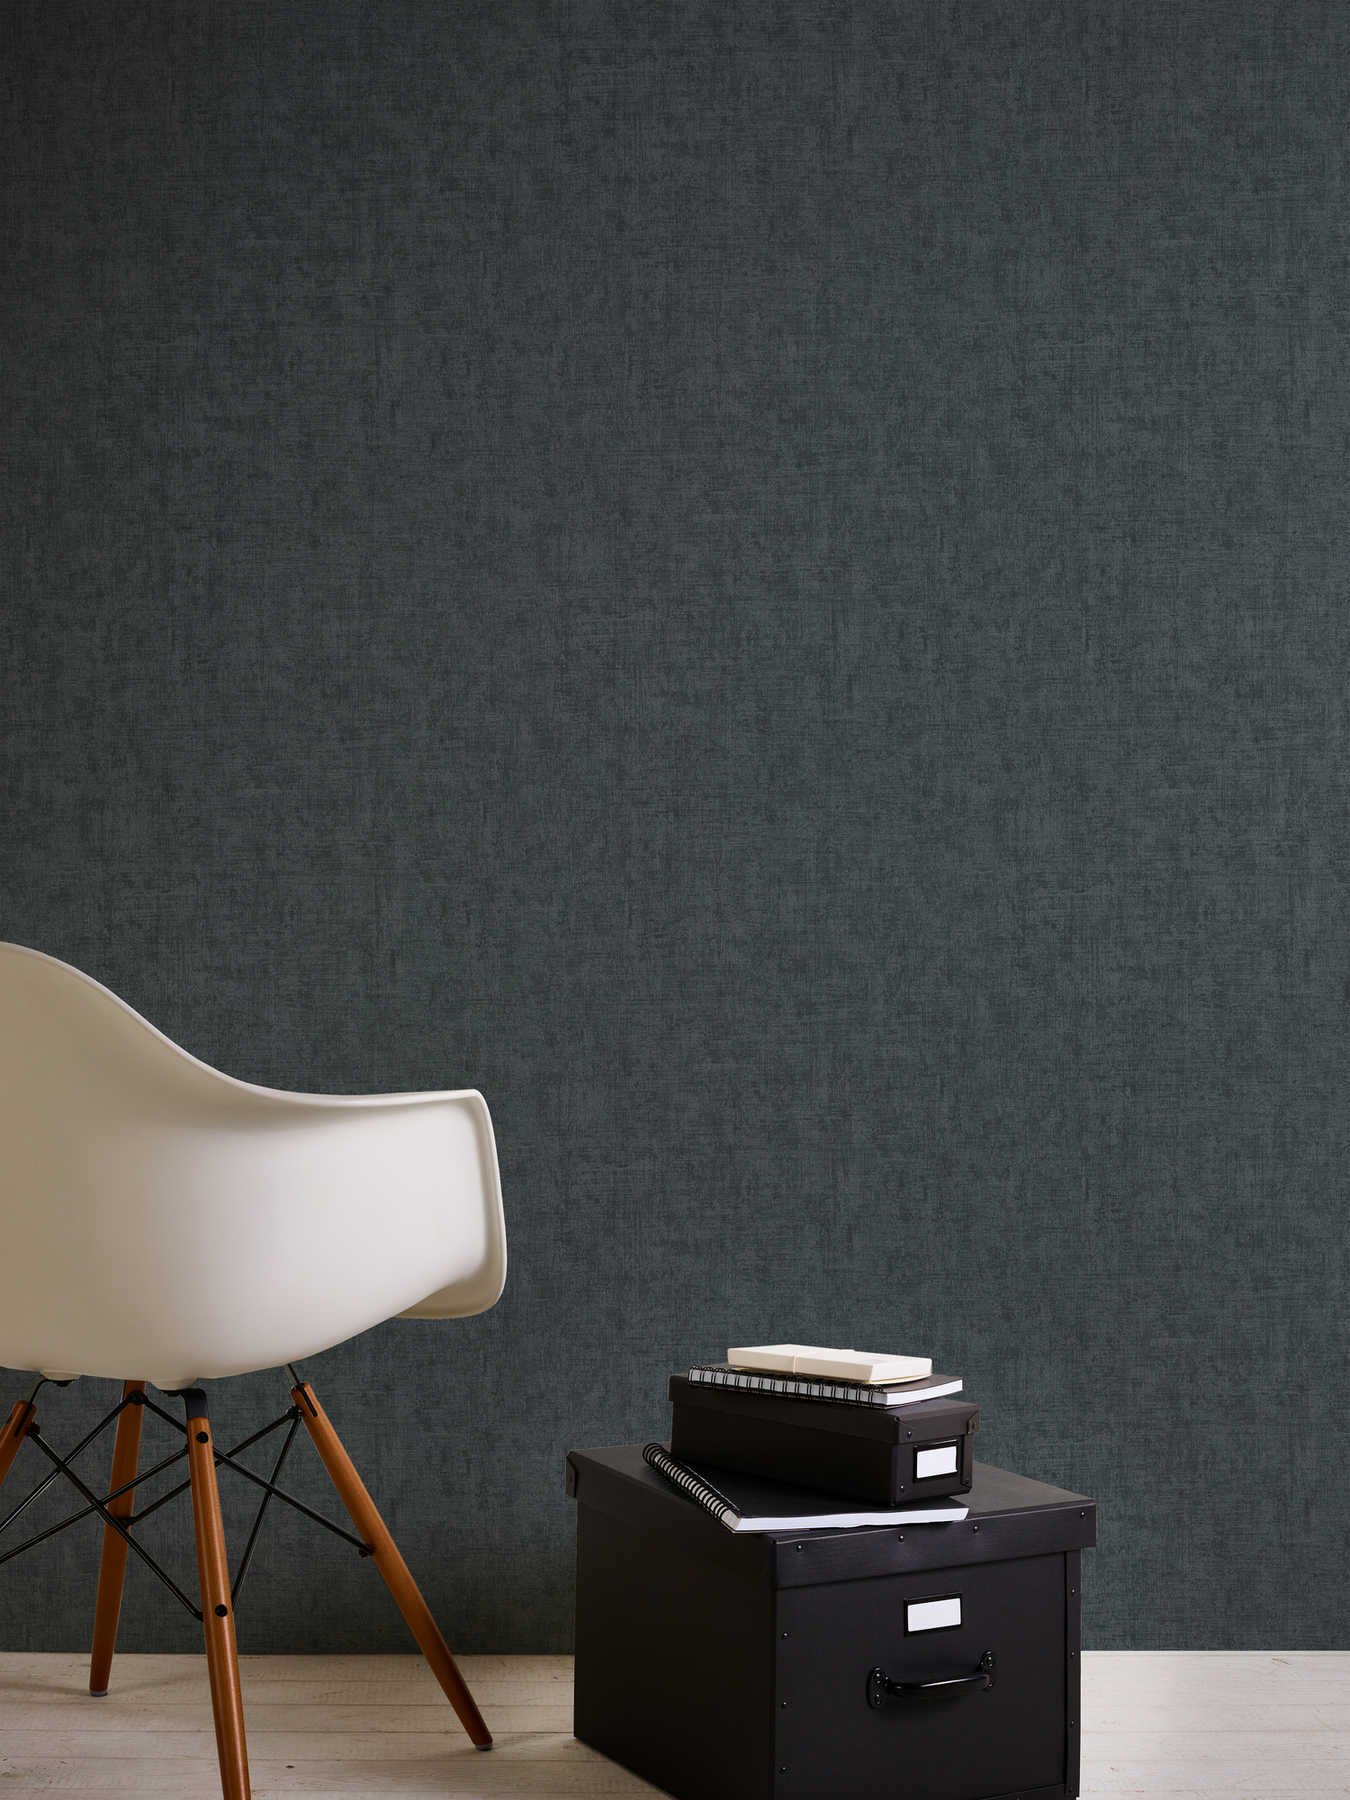             Dark wallpaper with colour and texture pattern - grey, black
        